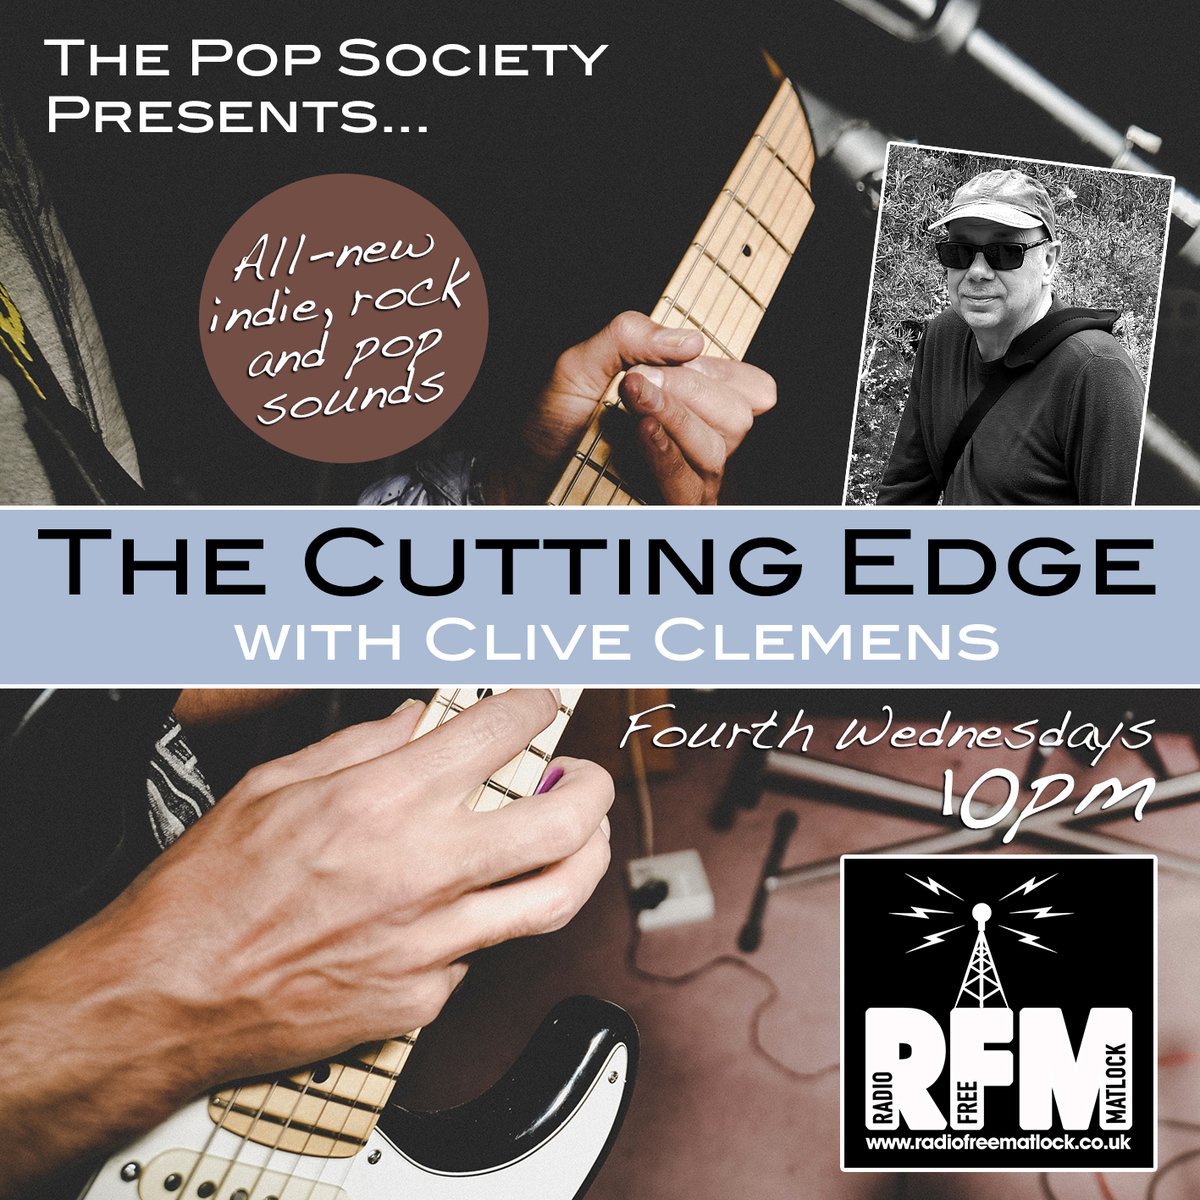 Wed 24th at 10pm new time for @RadioMatlock The Cutting Edge show. This month tunes include @TheShopWindow1 track from Daysdream picked by my brother + @SomebodysChild1 @SusannahJoffe @ViceKillerBand @alazarussoul and many more